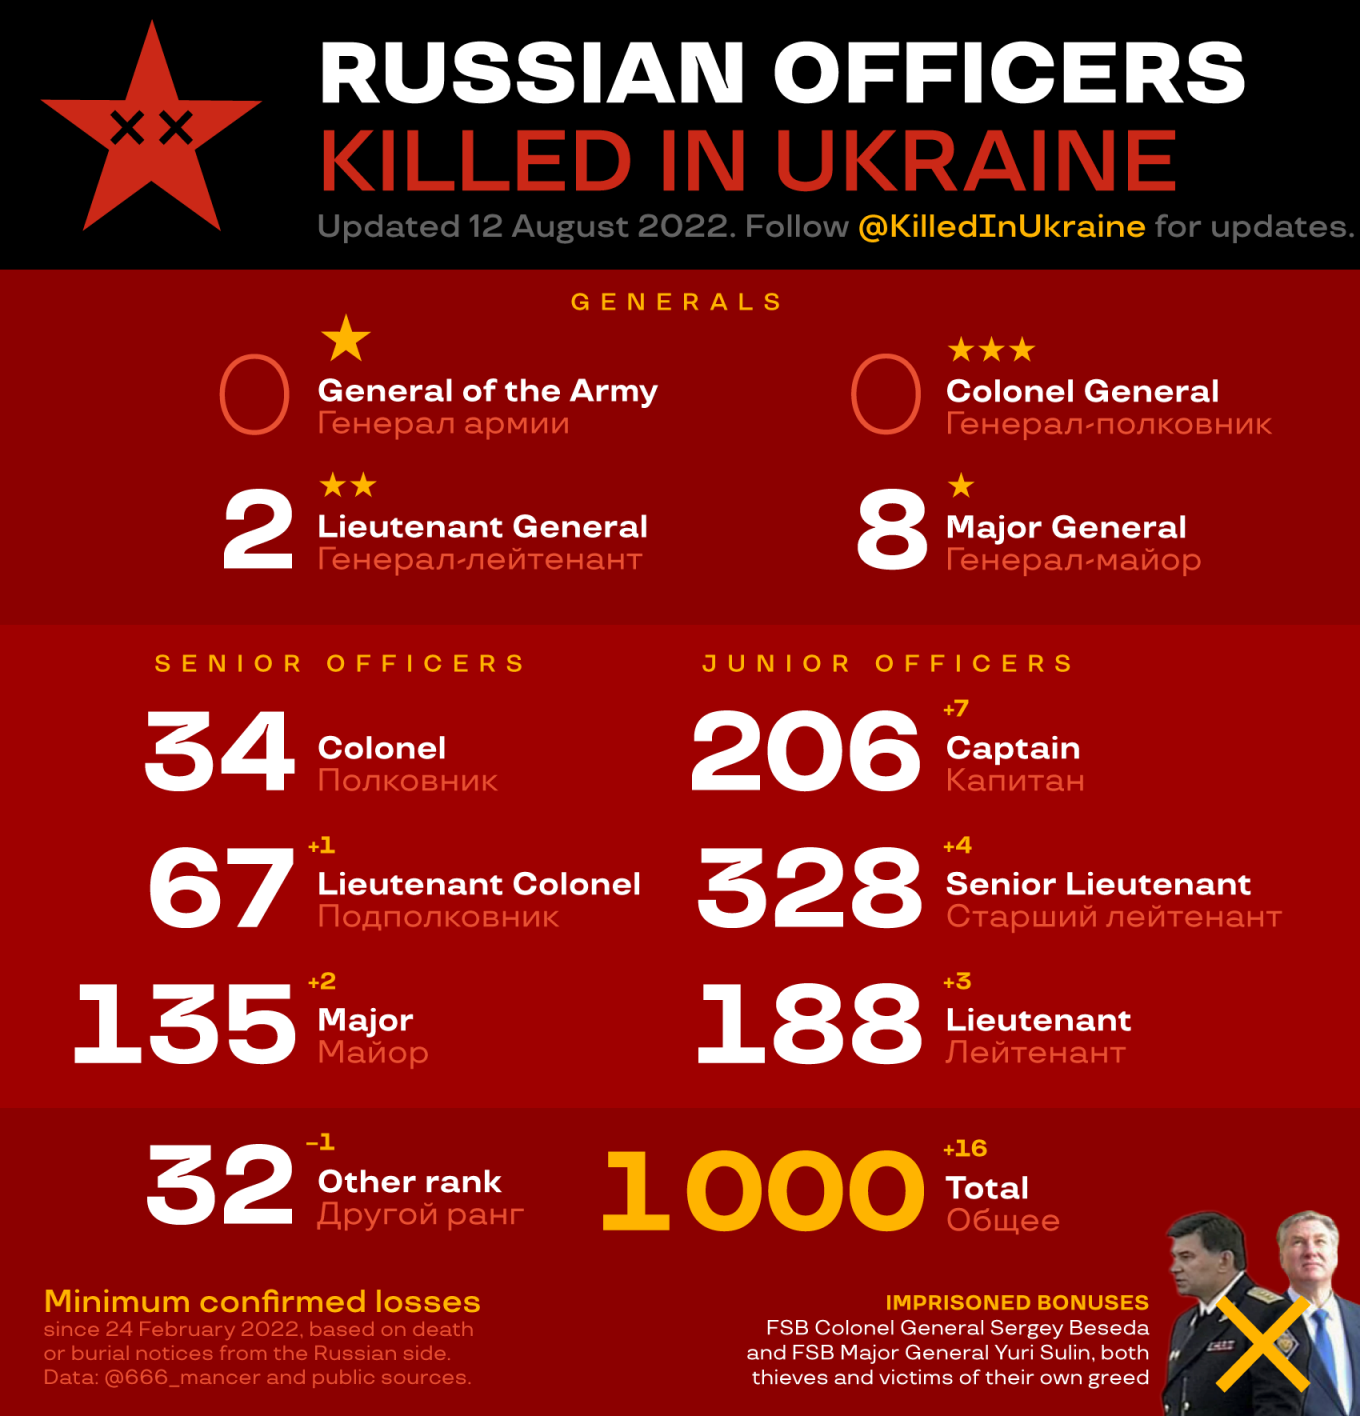 First Thousand russian Officers Killed in Ukraine, Defense Express